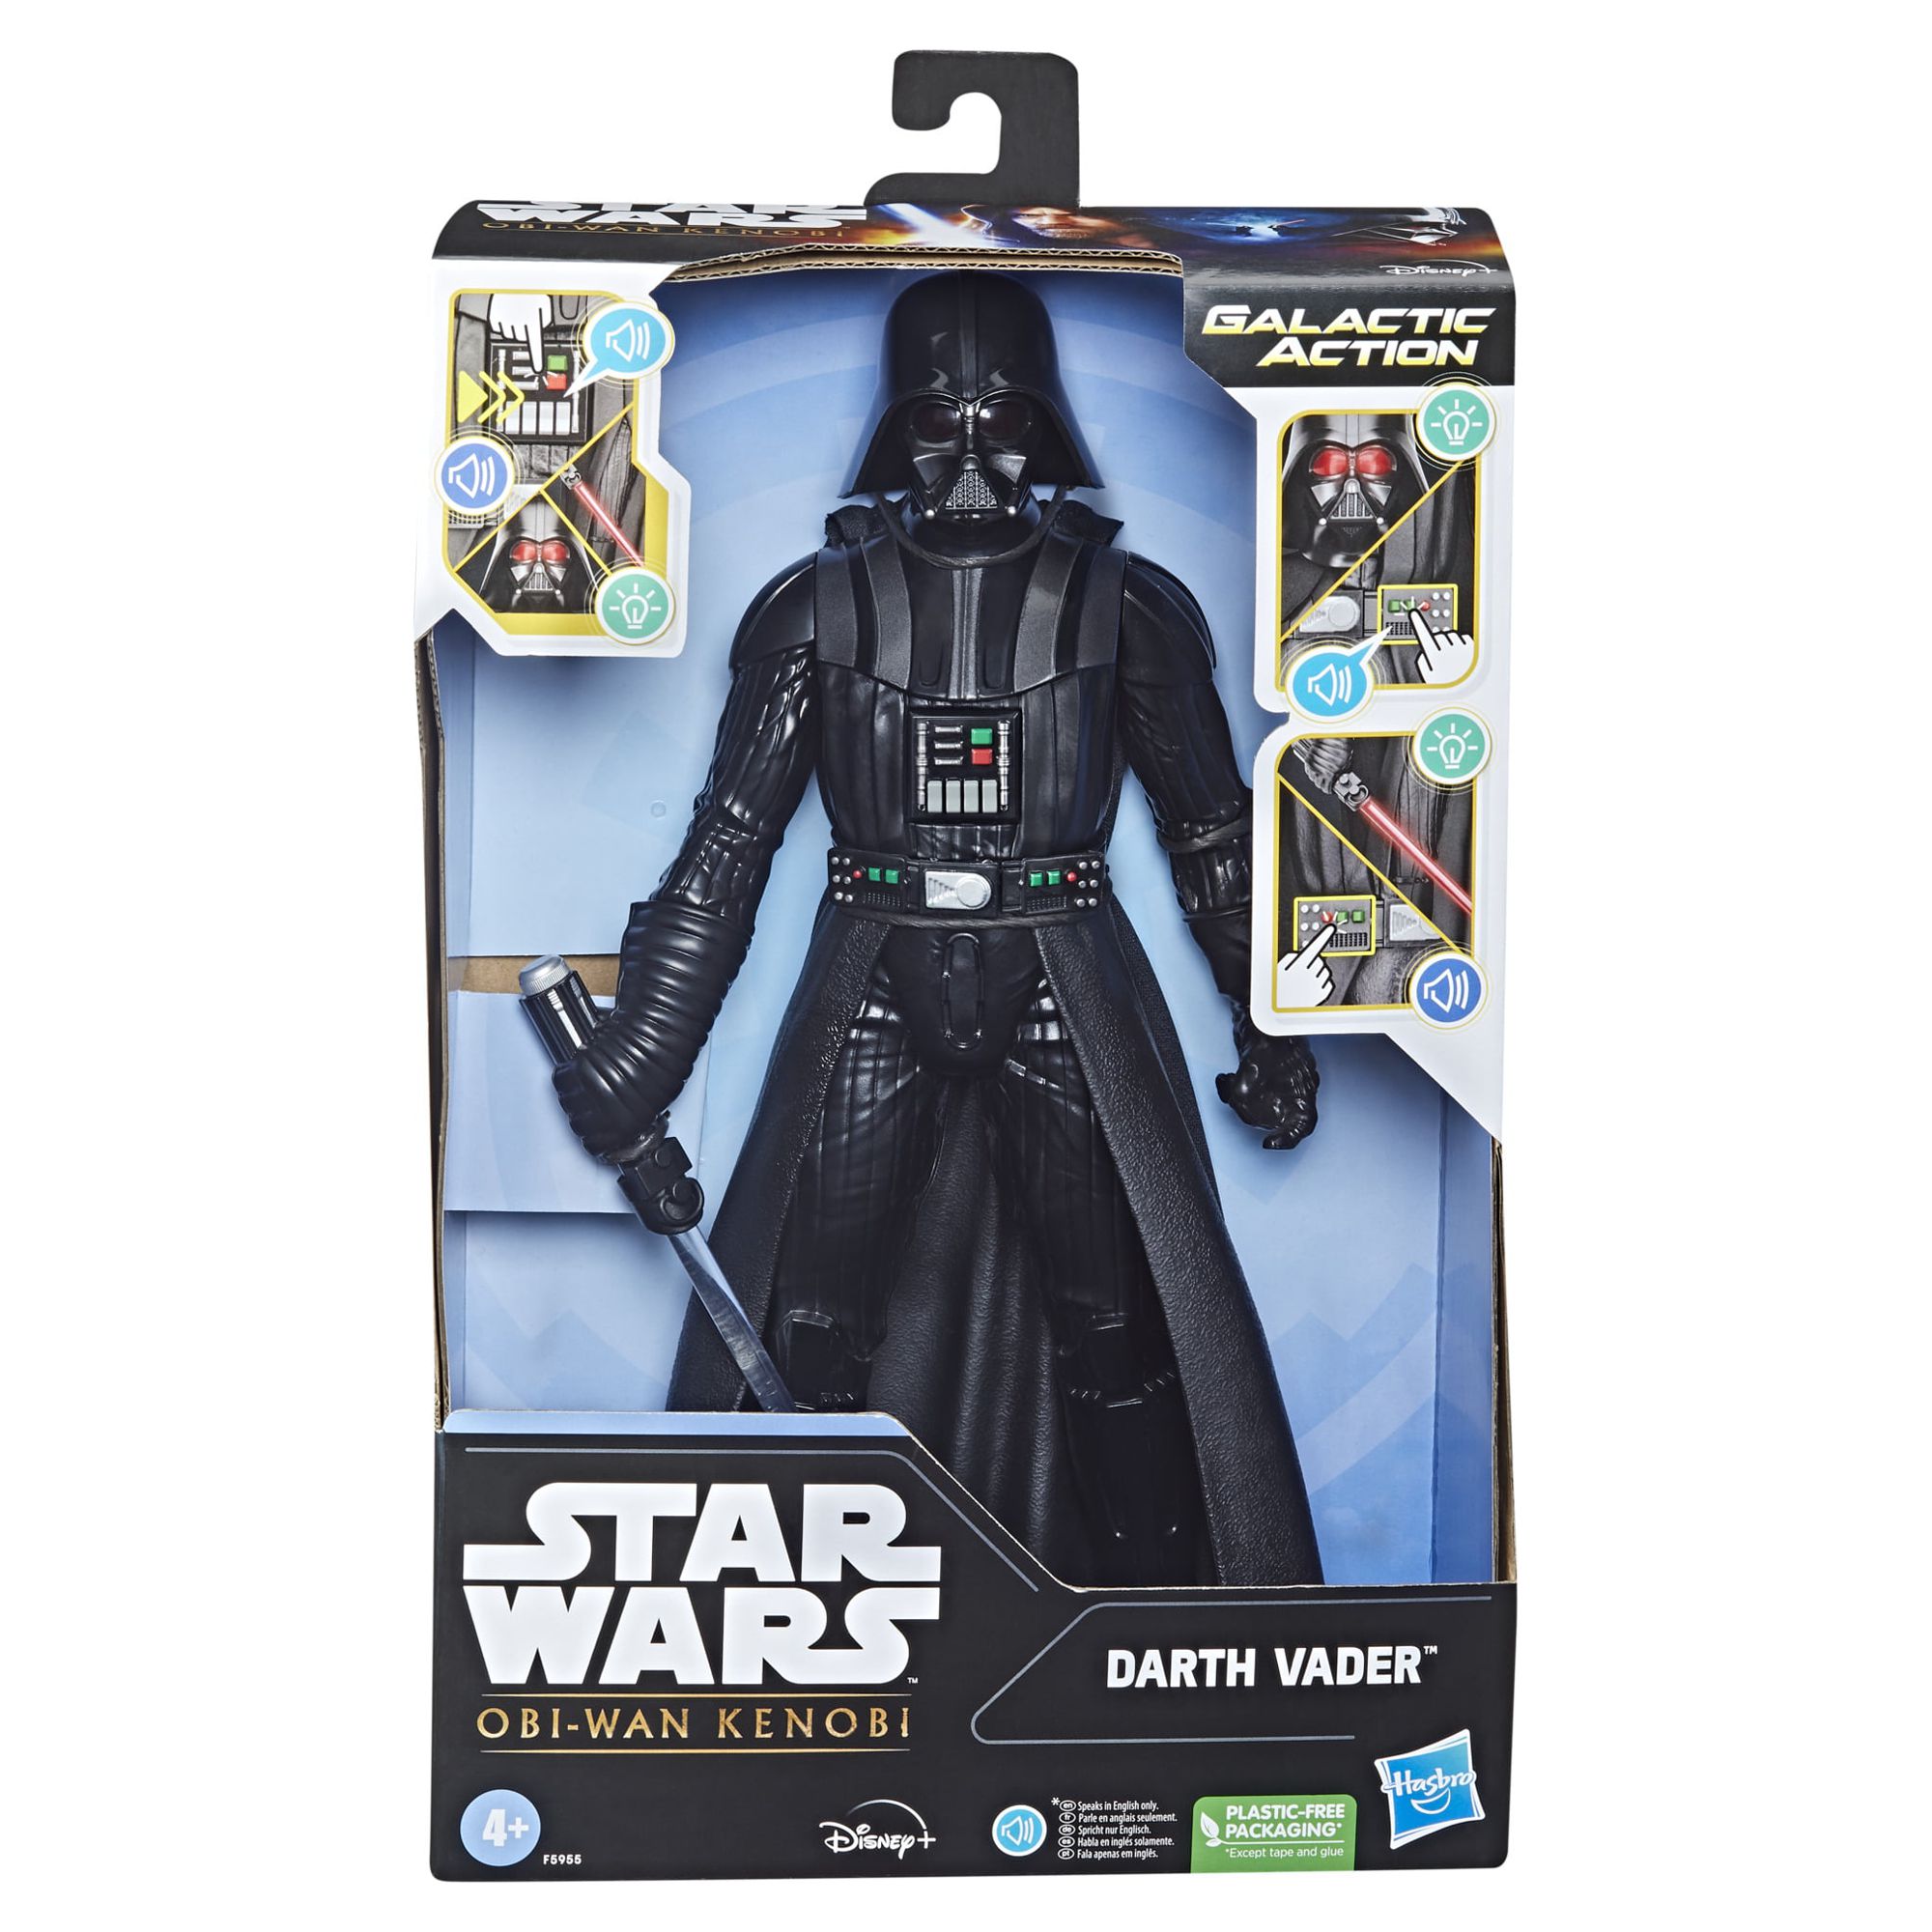 Star Wars: Obi-Wan Kenobi Darth Vader Toy Action Figure for Boys and Girls Ages 4 5 6 7 8 and Up (12”) - image 3 of 11